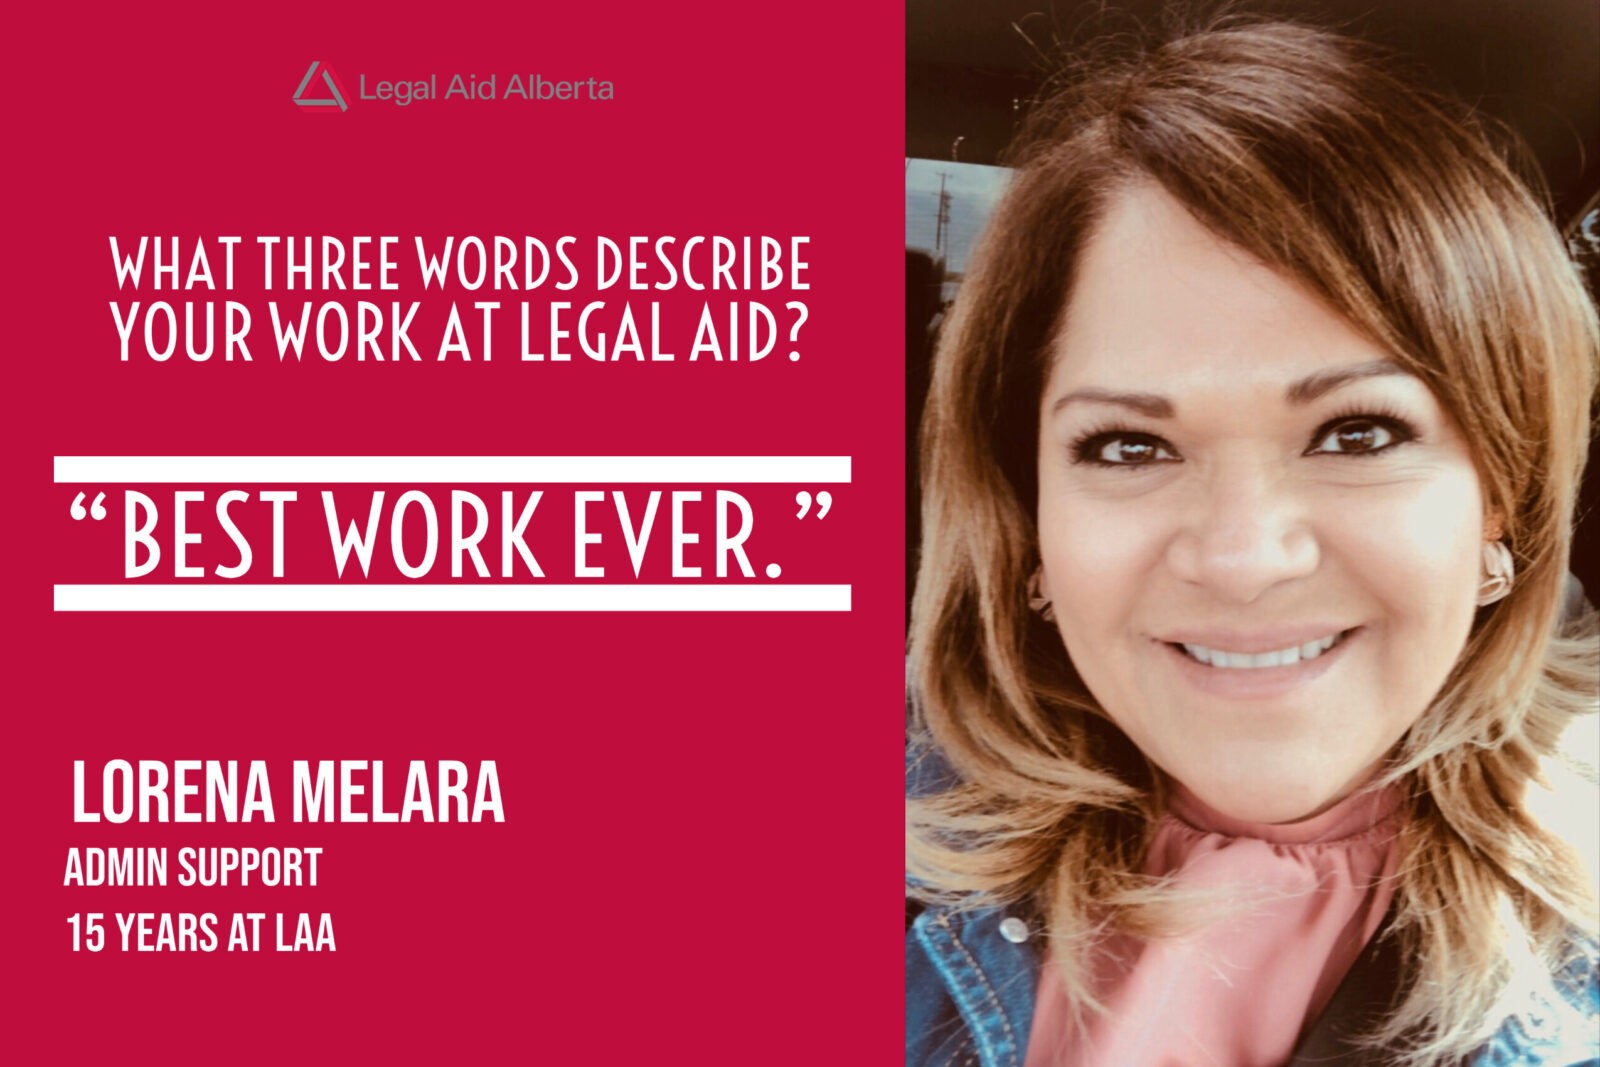 Graphic with a quote by Legal Aid staff Lorena Melara who says Legal Aid is the "best work ever."